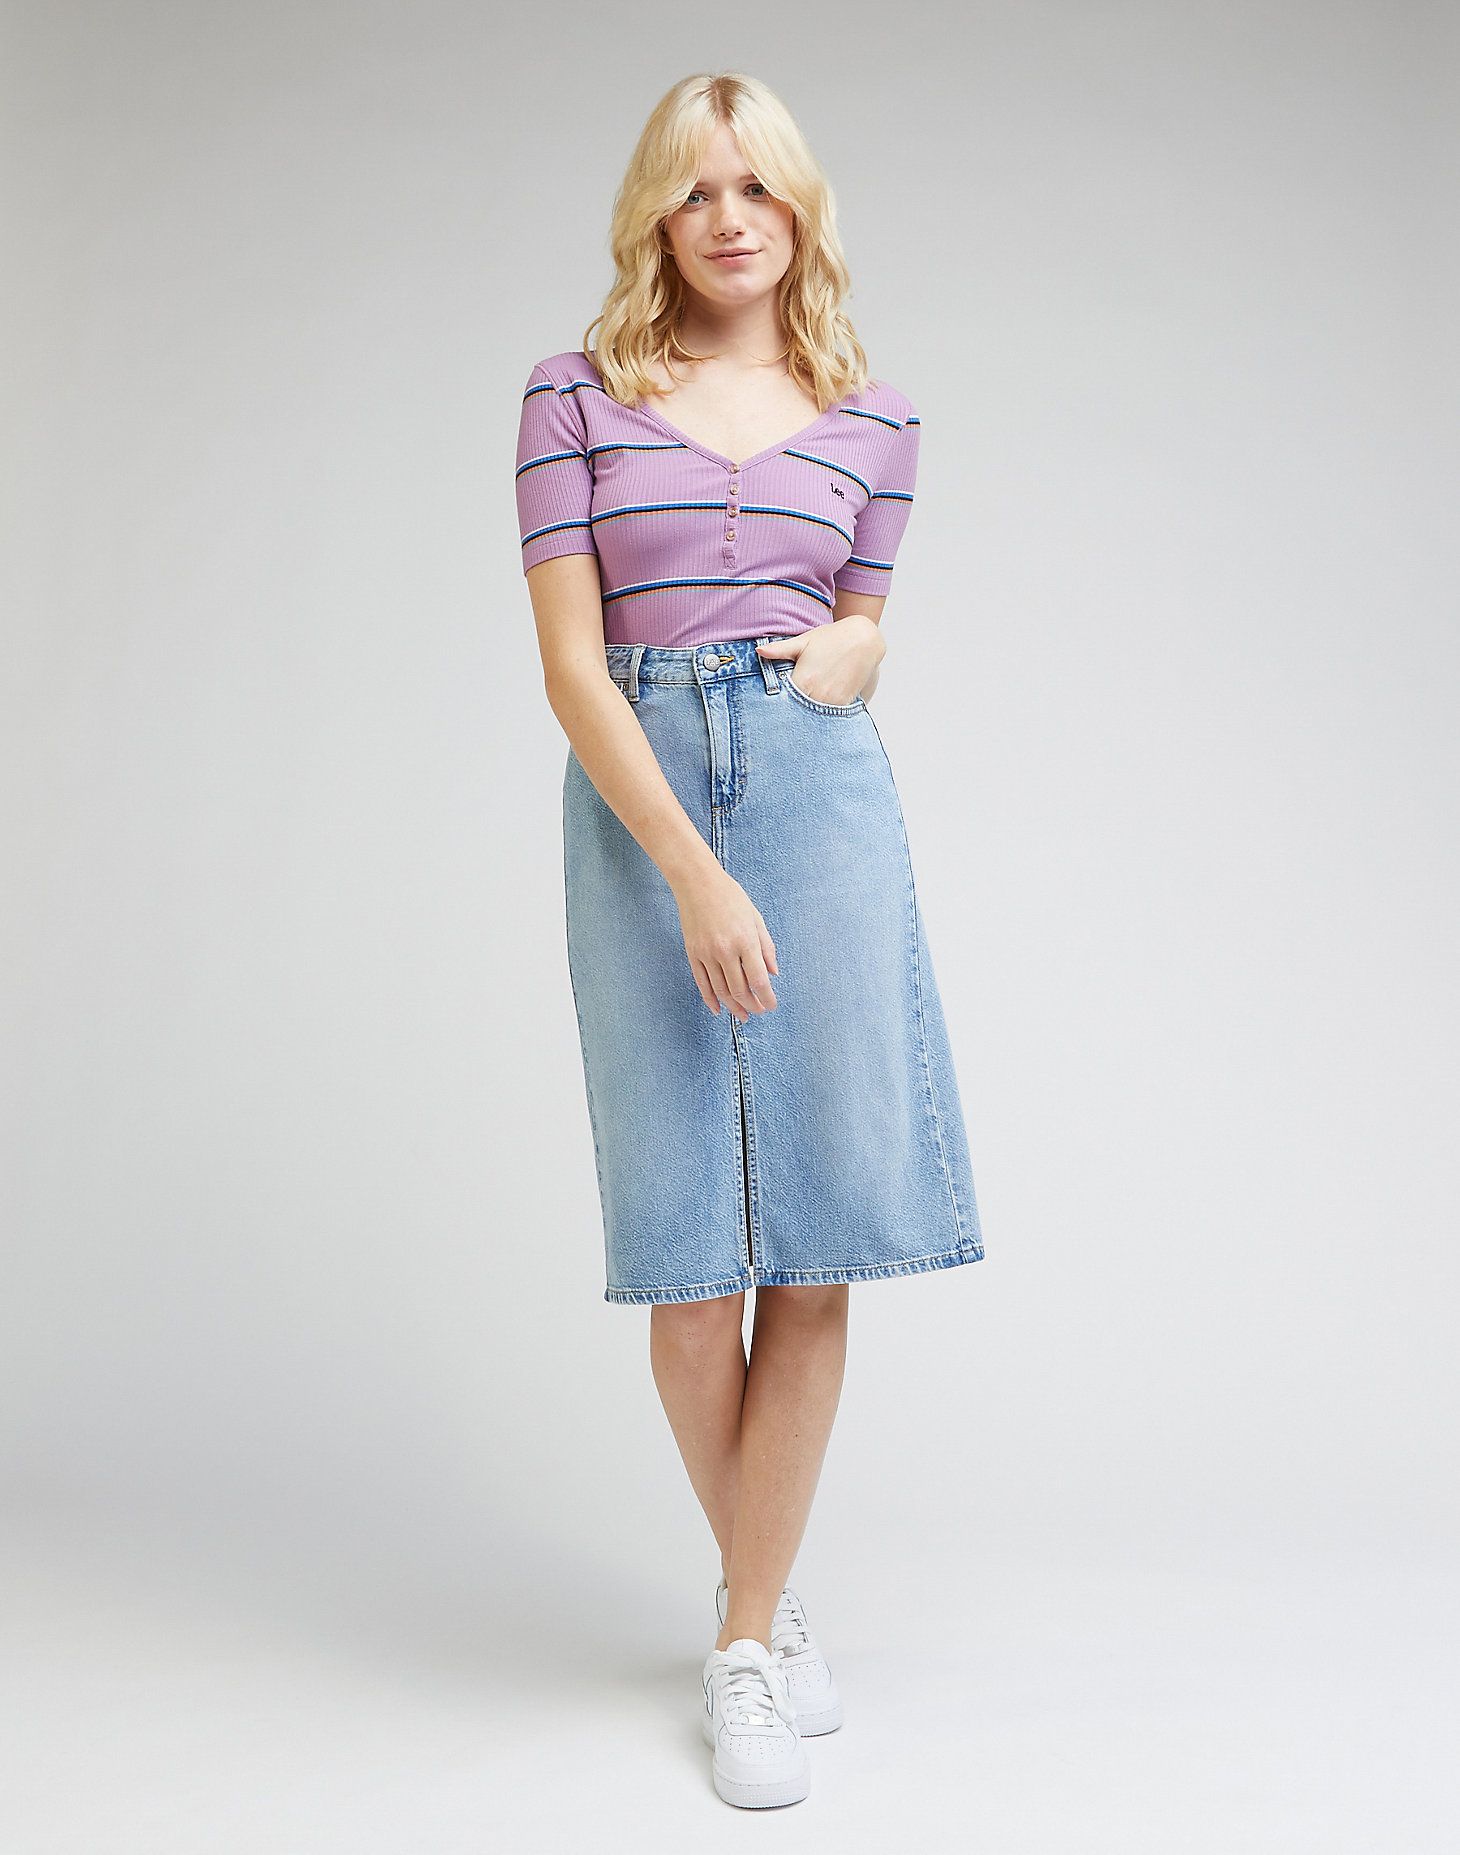 Midi Skirt in Frosted Blue alternative view 2